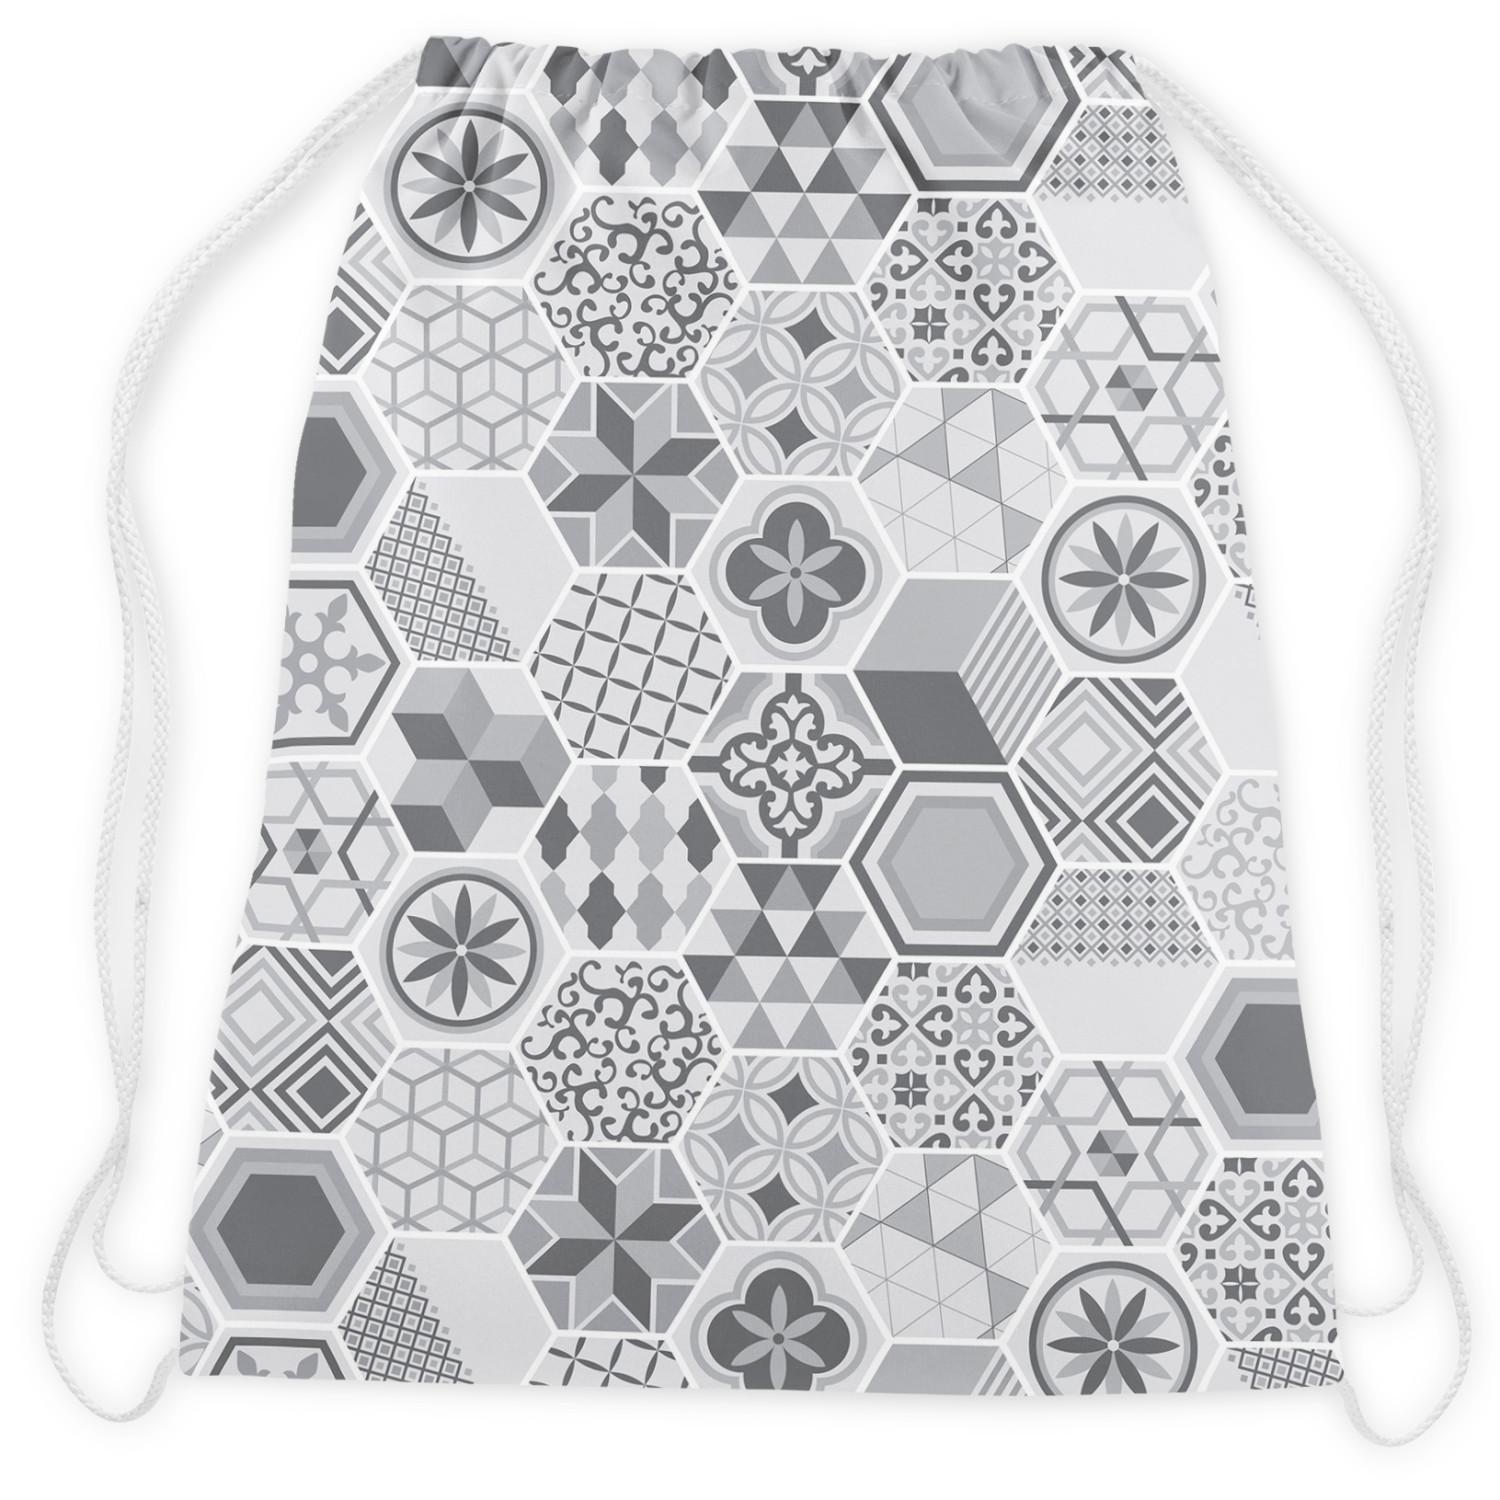 Backpack Ingenious geometry - cubes, polygons and floral motifs